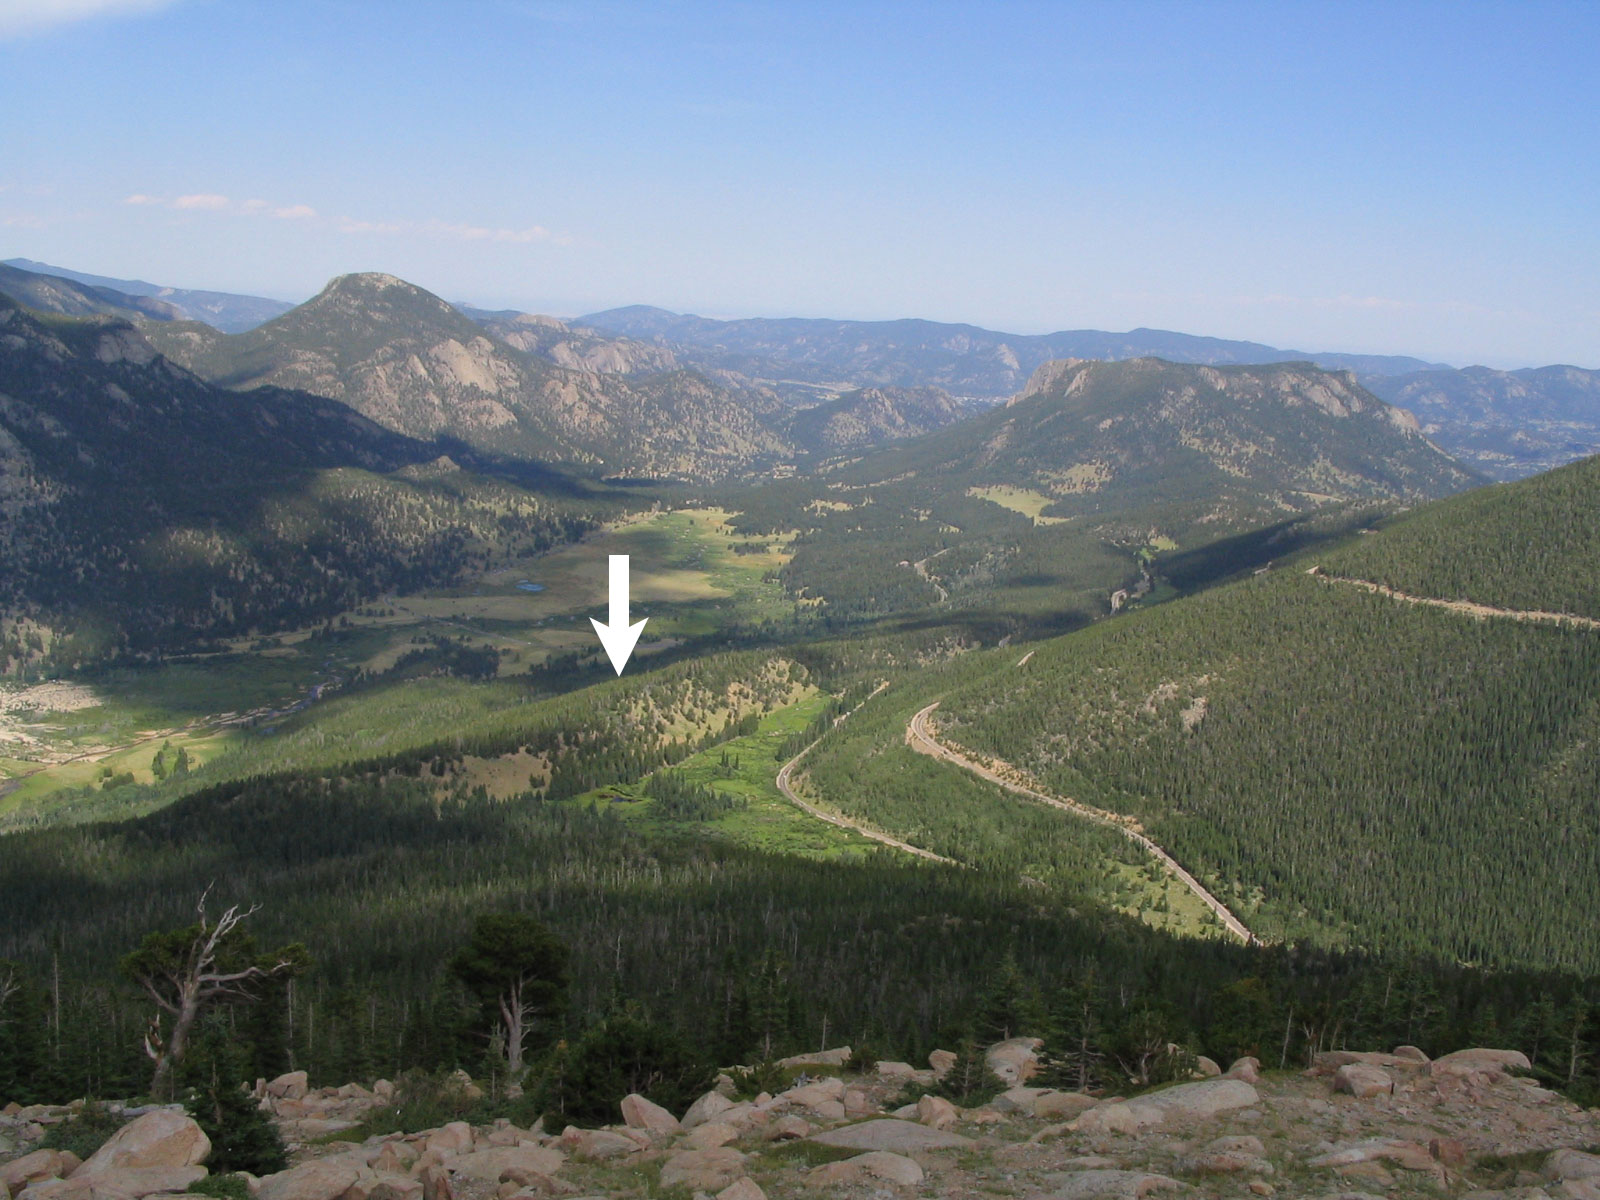 Photograph of West Horseshoe Park in Colorado.